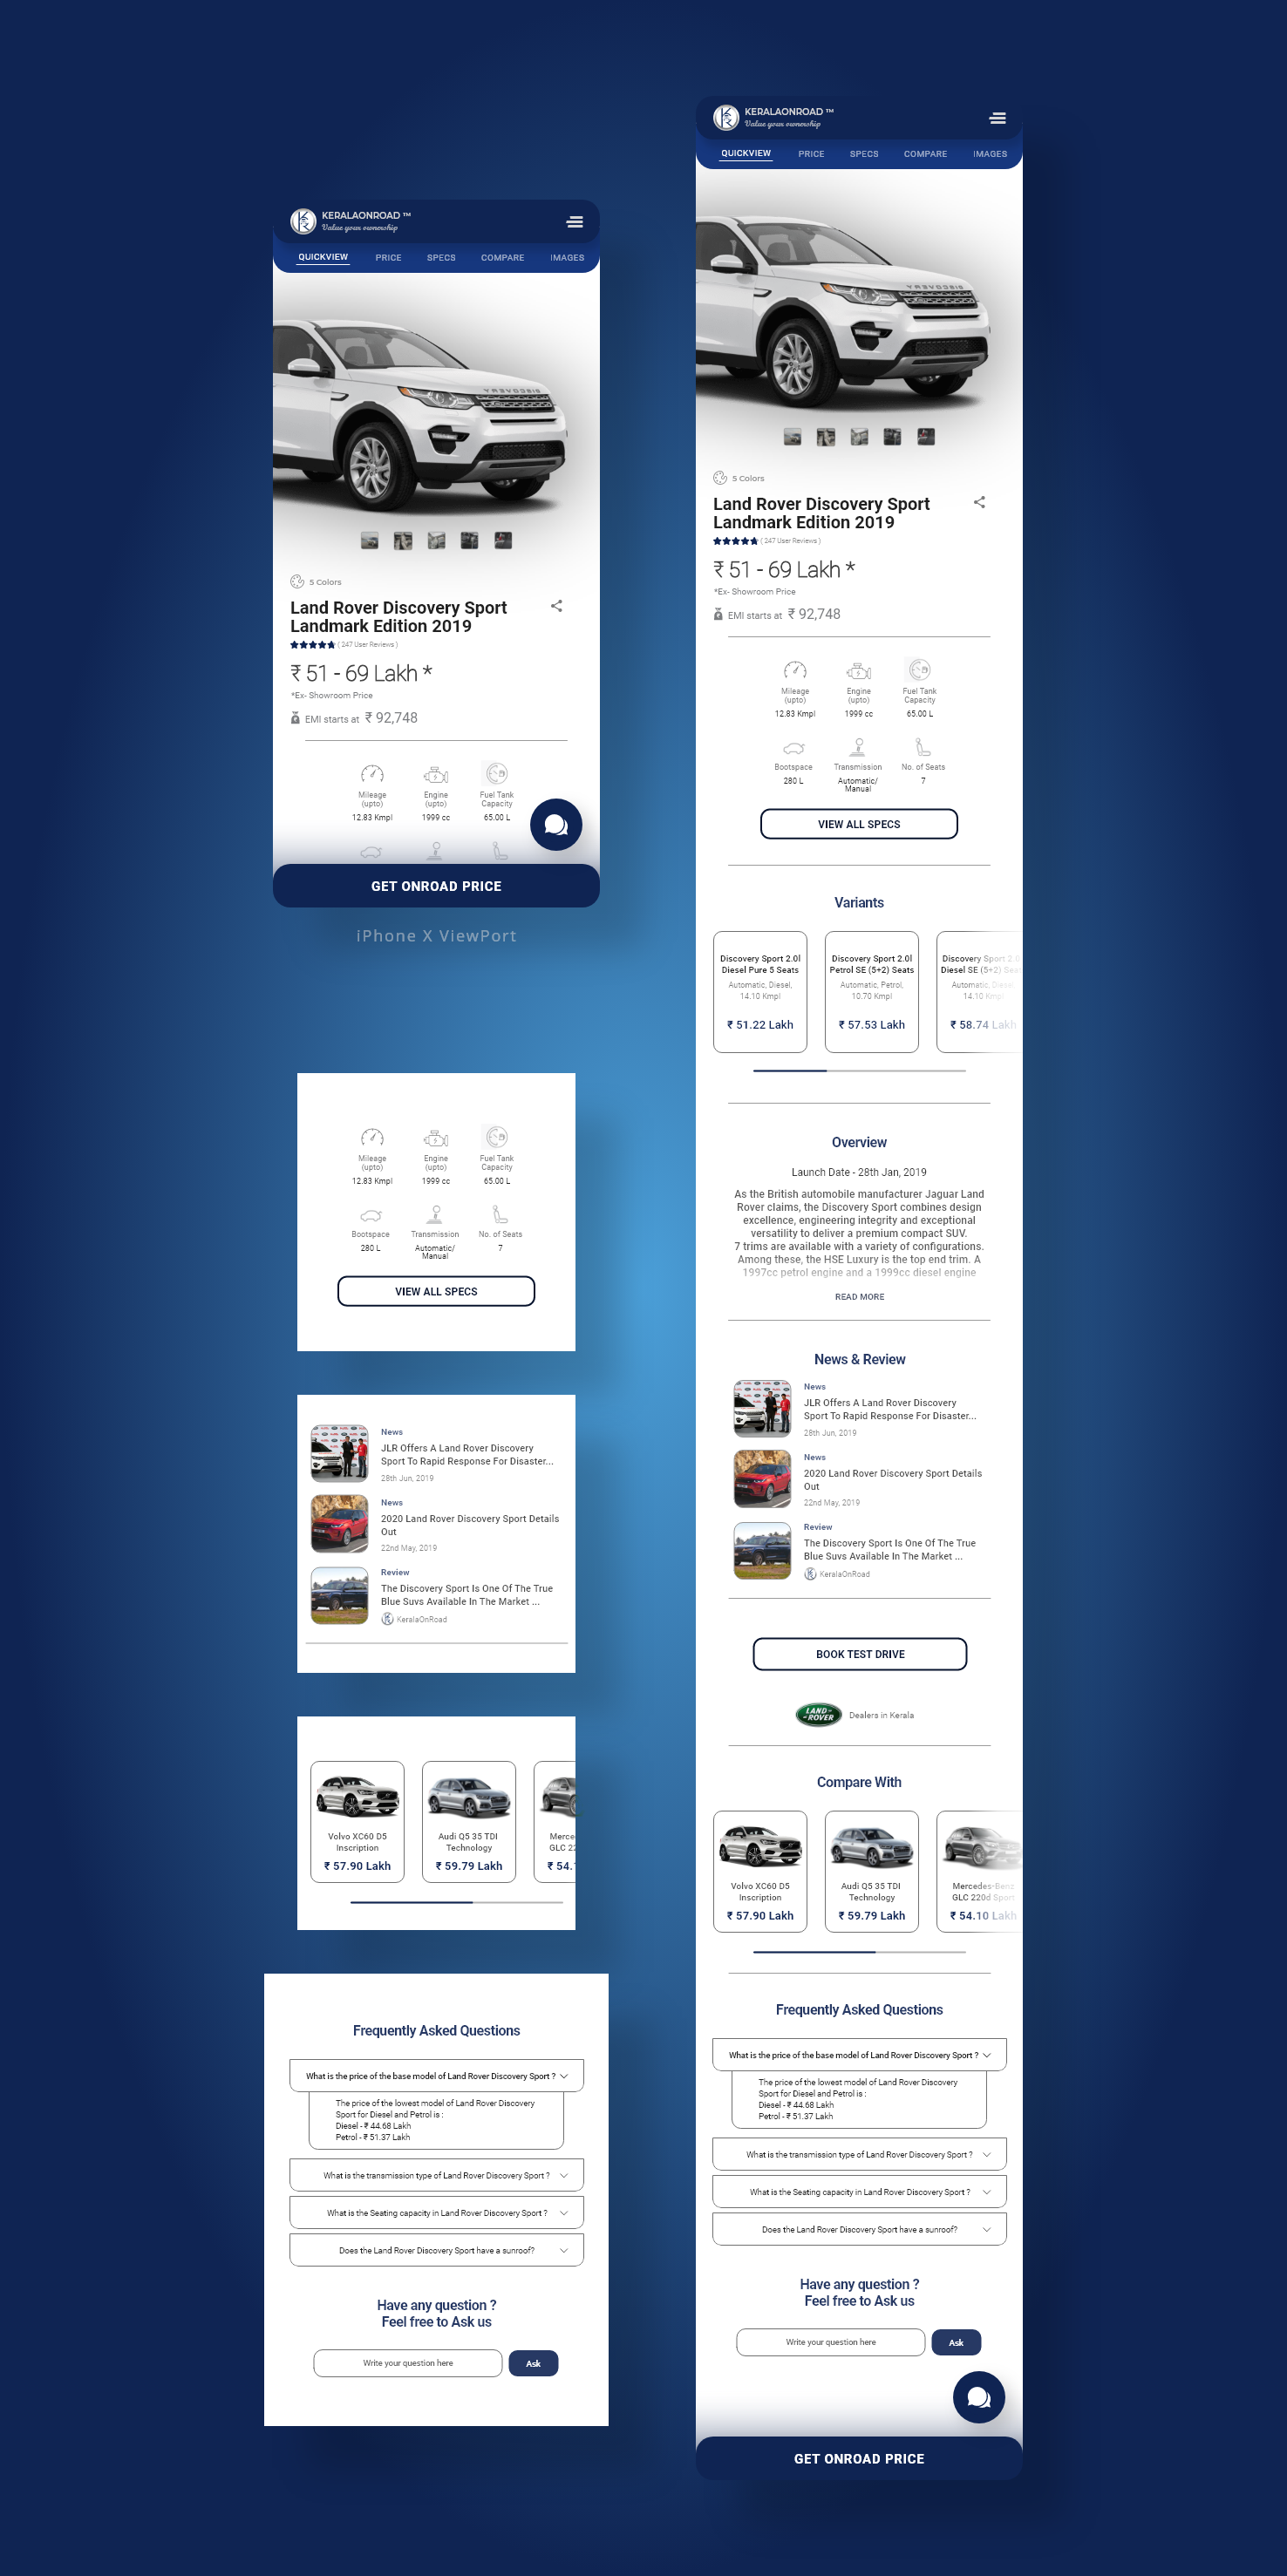 Image showing the full page design for the Product page